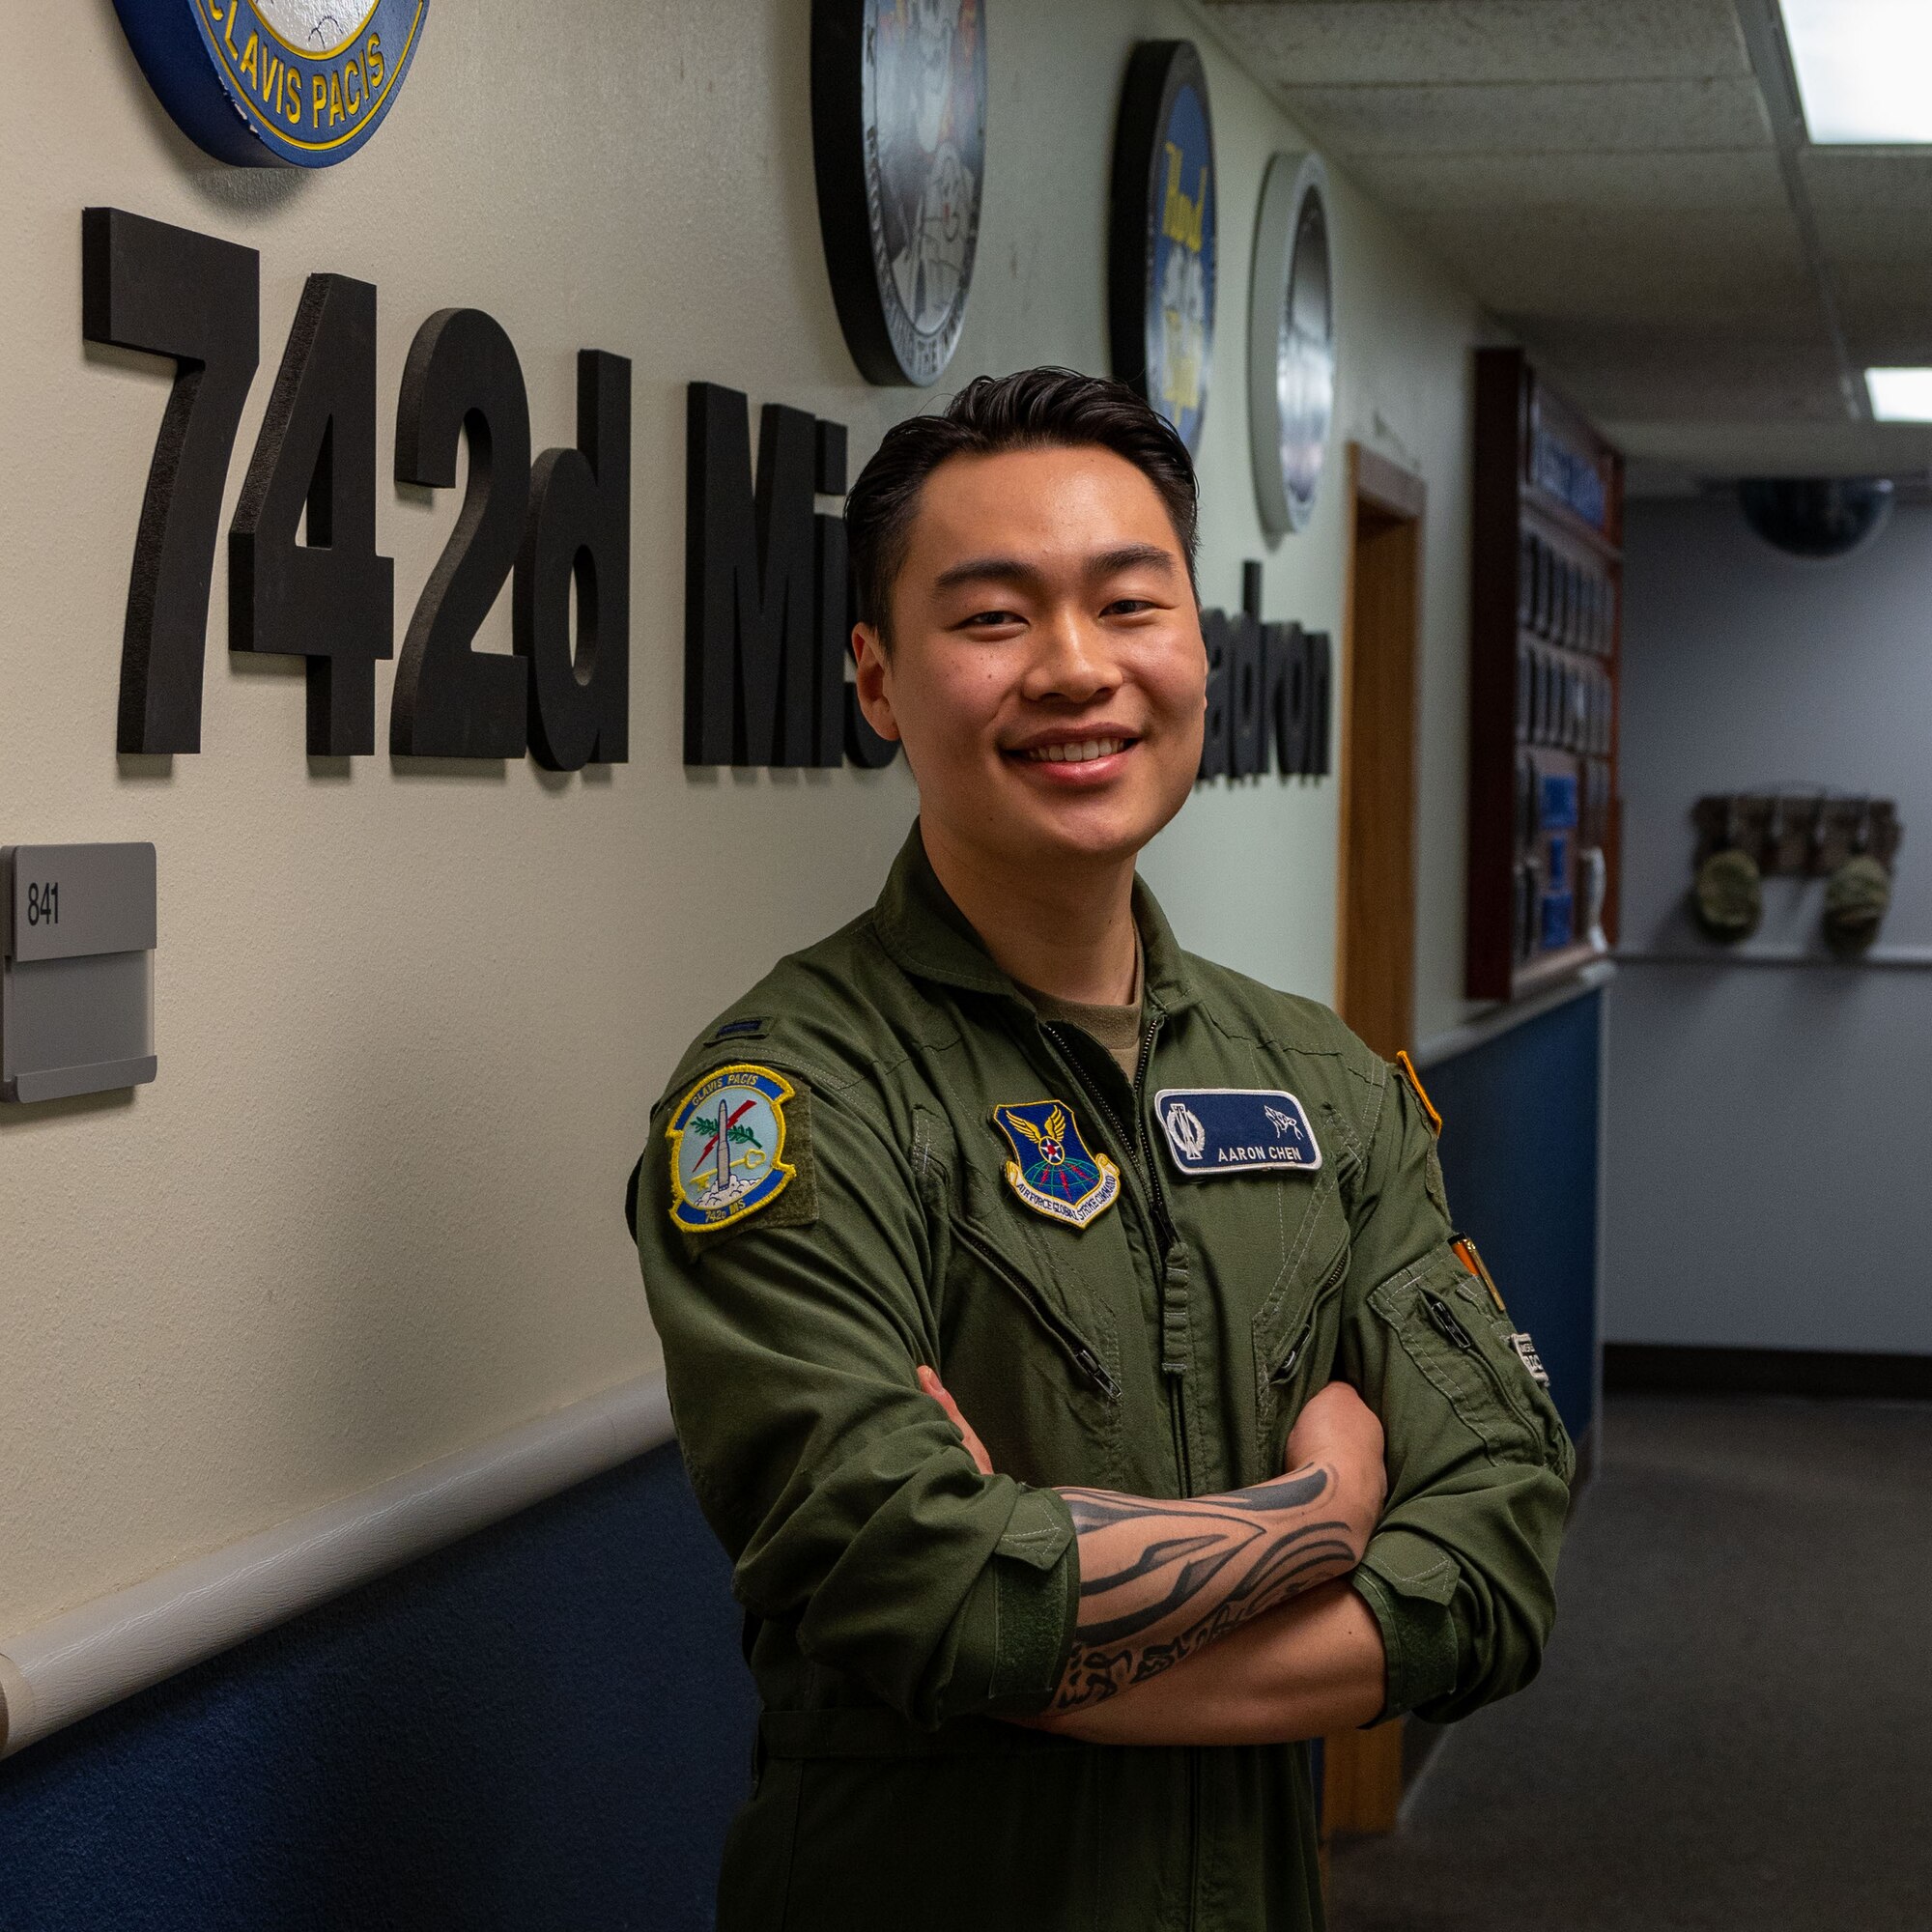 1st Lt. Aaron Chen, Nuclear and Missiles  Operations officer, poses for a photo at Minot Air Force Base, North Dakota, May 5, 2023. (U.S. Air Force photo by Senior Airman Evan
Lichtenhan)